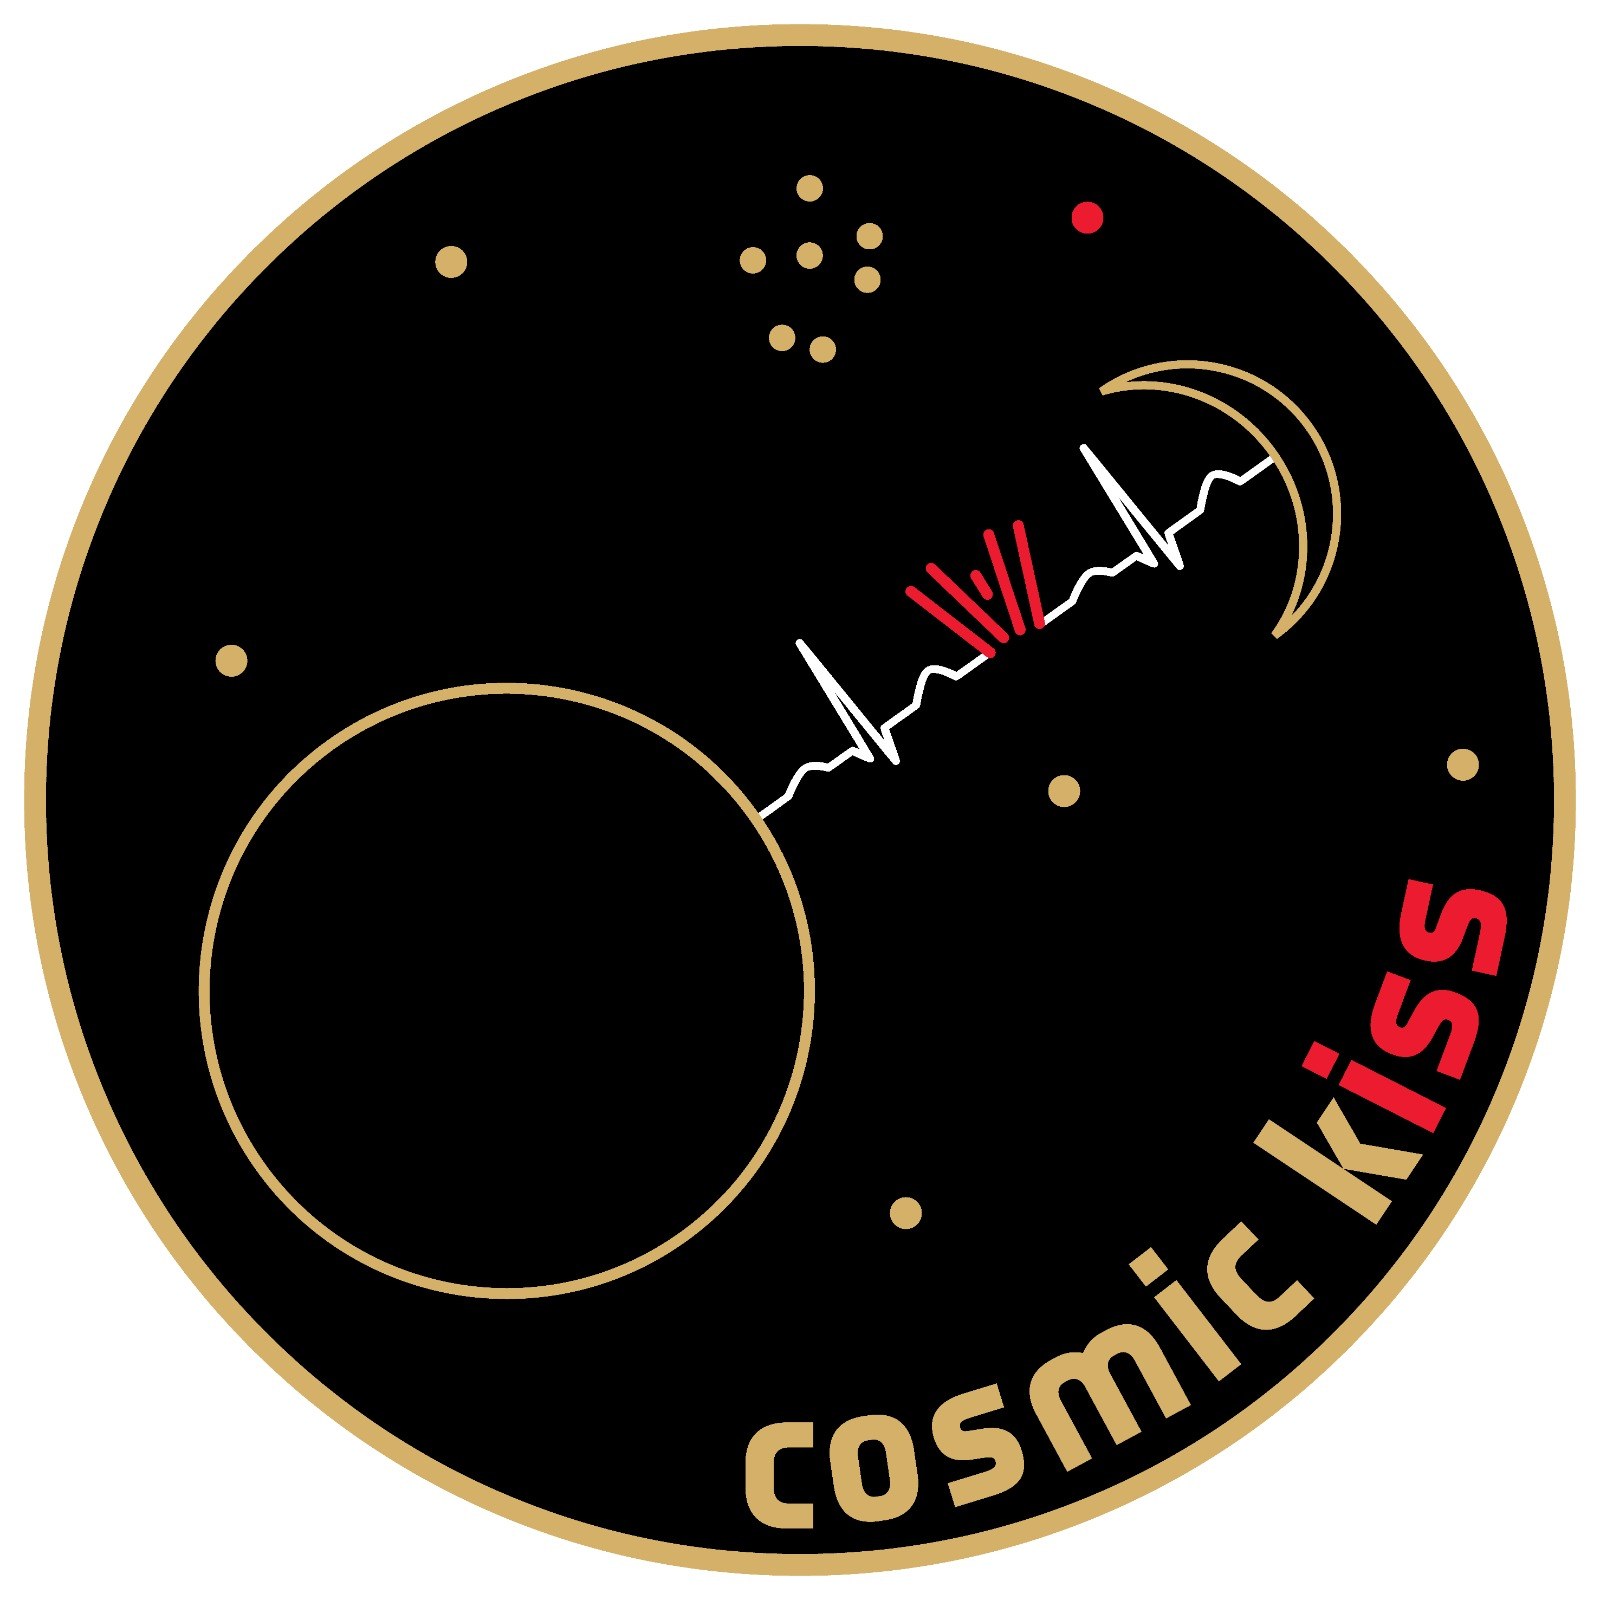 ‘Cosmic Kiss’ – a declaration of love for space